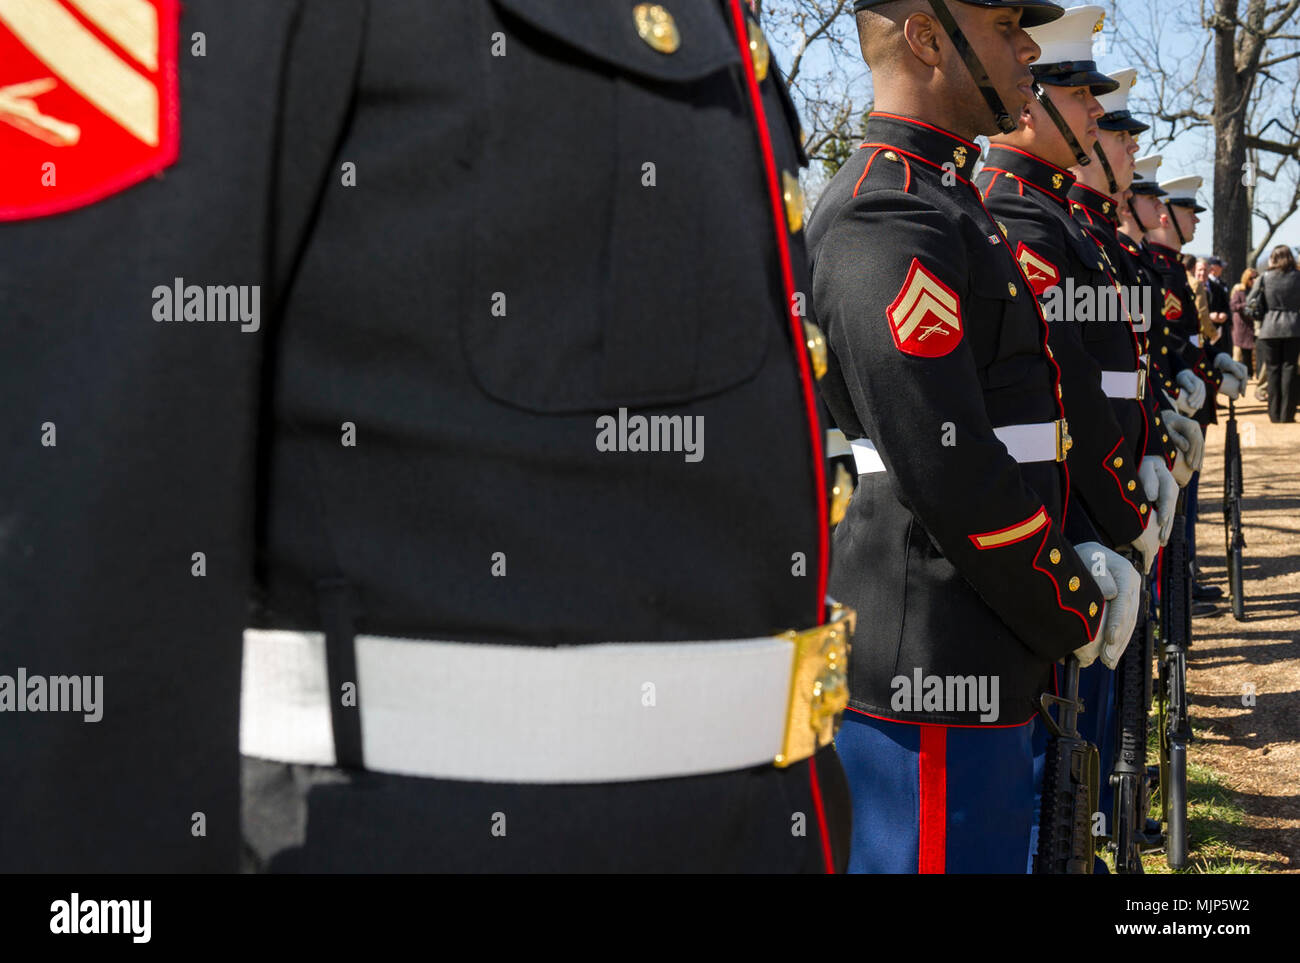 U.S. Marines with Marine Corps Base Quantico Ceremonial Platoon greet guests attending the Presidential wreath laying ceremony held at the final resting place of the 4th President of the United States, James Madison, also known as the Father of the Constitution, at his home at Montpelier, Orange, Va., March 16, 2018. This event was held in commemoration of the 267th anniversary of the birth of Madison, born in 1751, and has also been decreed as James Madison Appreciation Day for the Commonwealth of Virginia. Armed Forces and civilians displaying courage bravery dedication commitment and sacrif Stock Photo